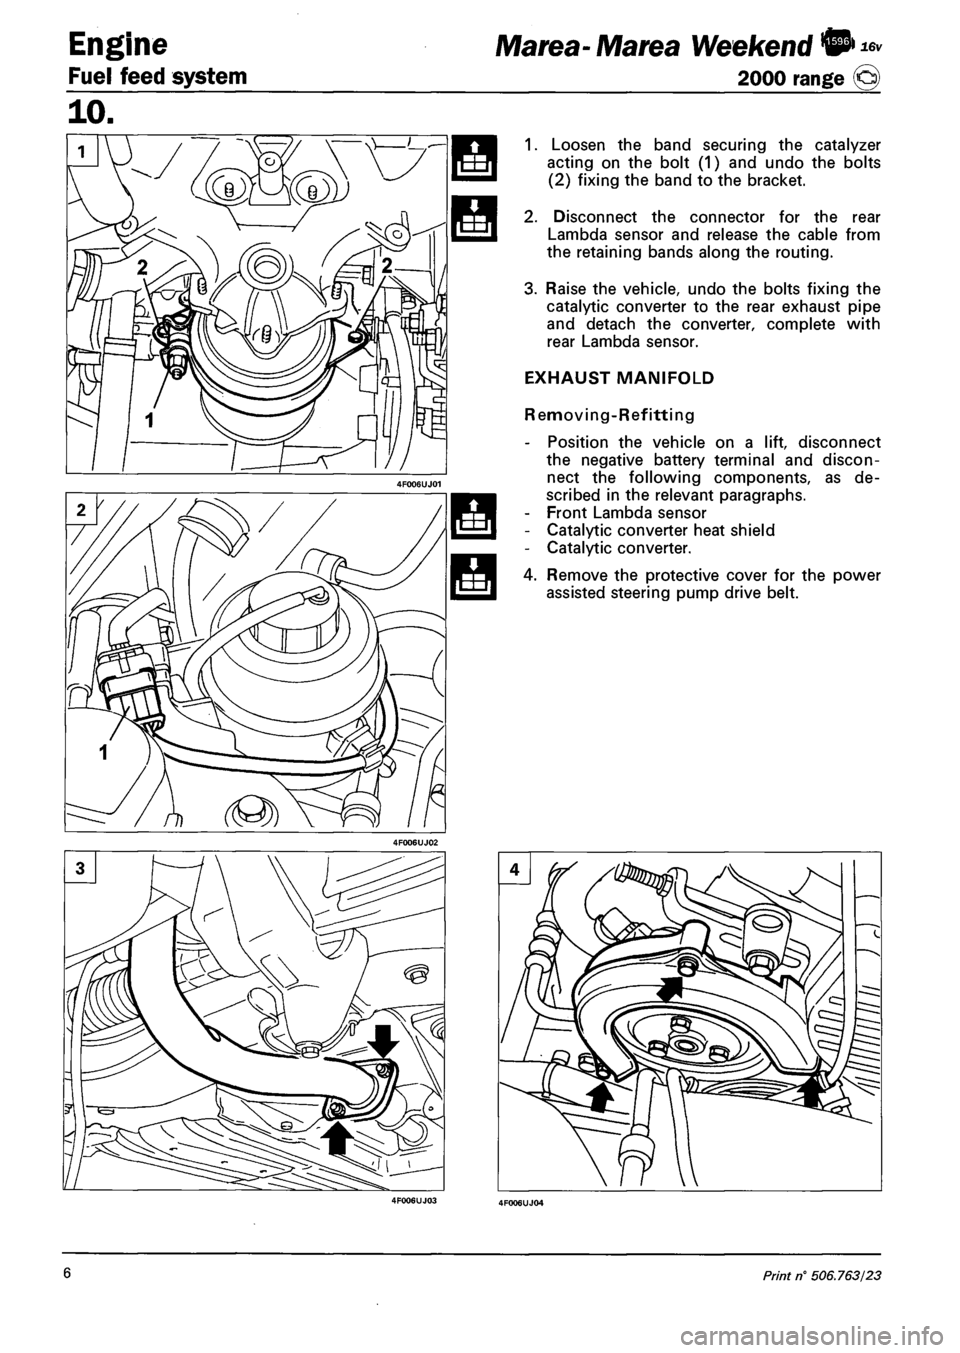 FIAT MAREA 2000 1.G Workshop Manual Engine 
Fuel feed system 
16v Marea- Marea Weekend © 
2000 range @ 
1. Loosen the band securing the catalyzer 
acting on the bolt (1) and undo the bolts 
(2) fixing the band to the bracket. 
2. Disco